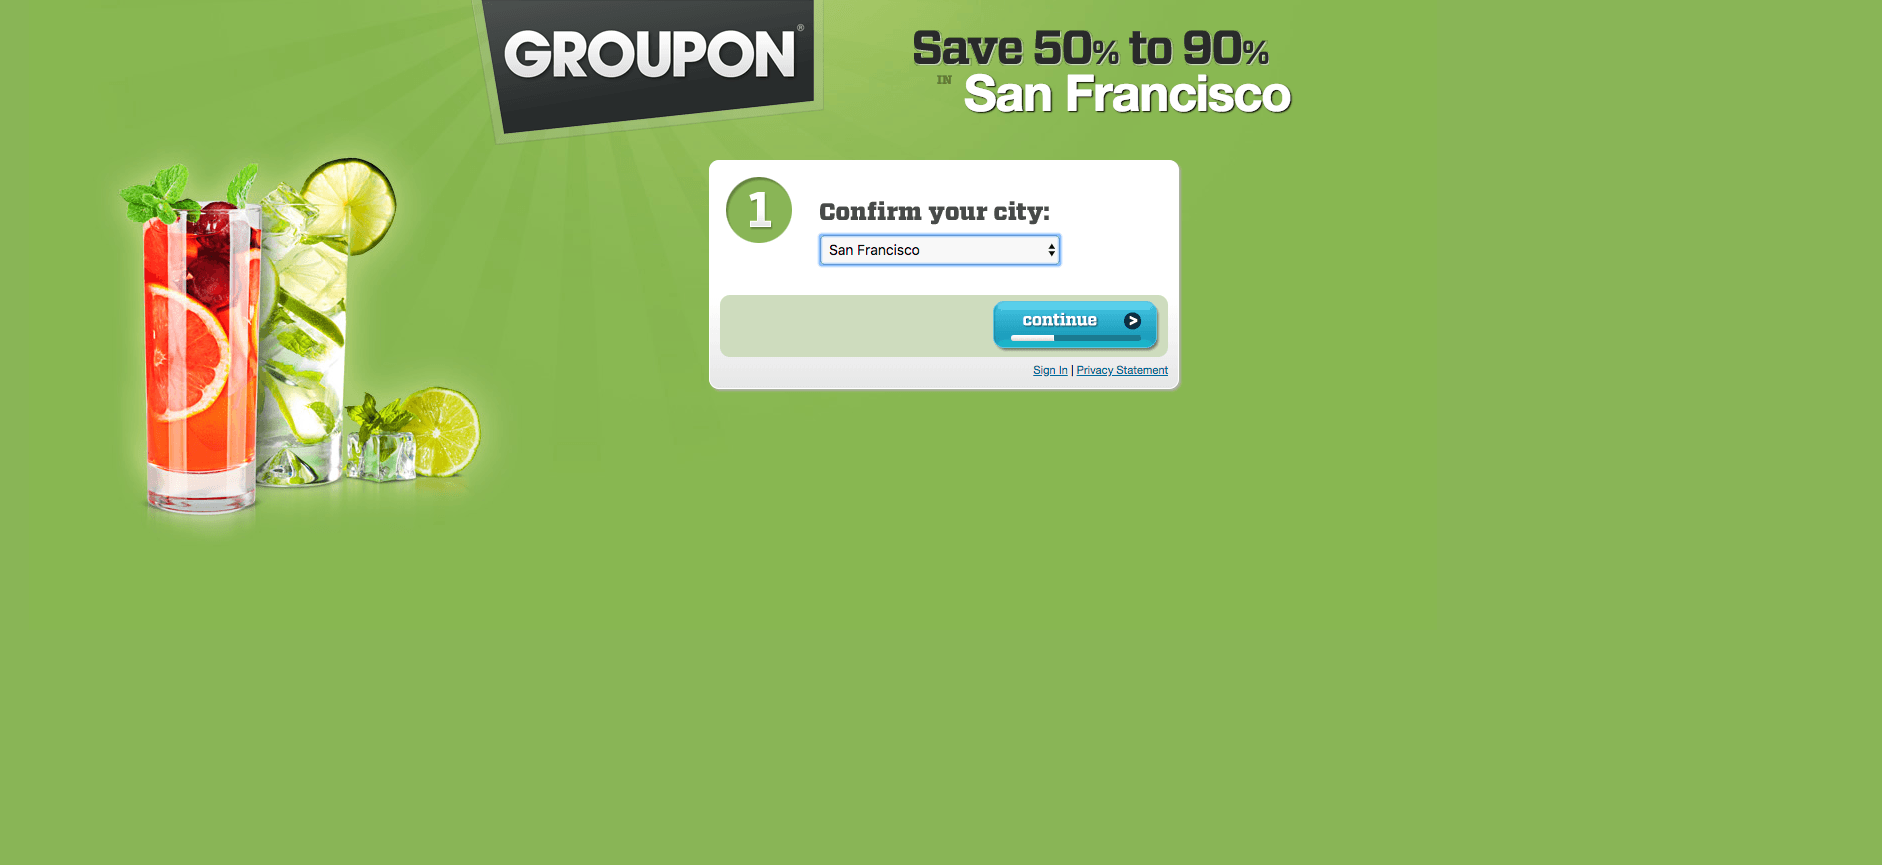 The older (and greener) version of Groupon